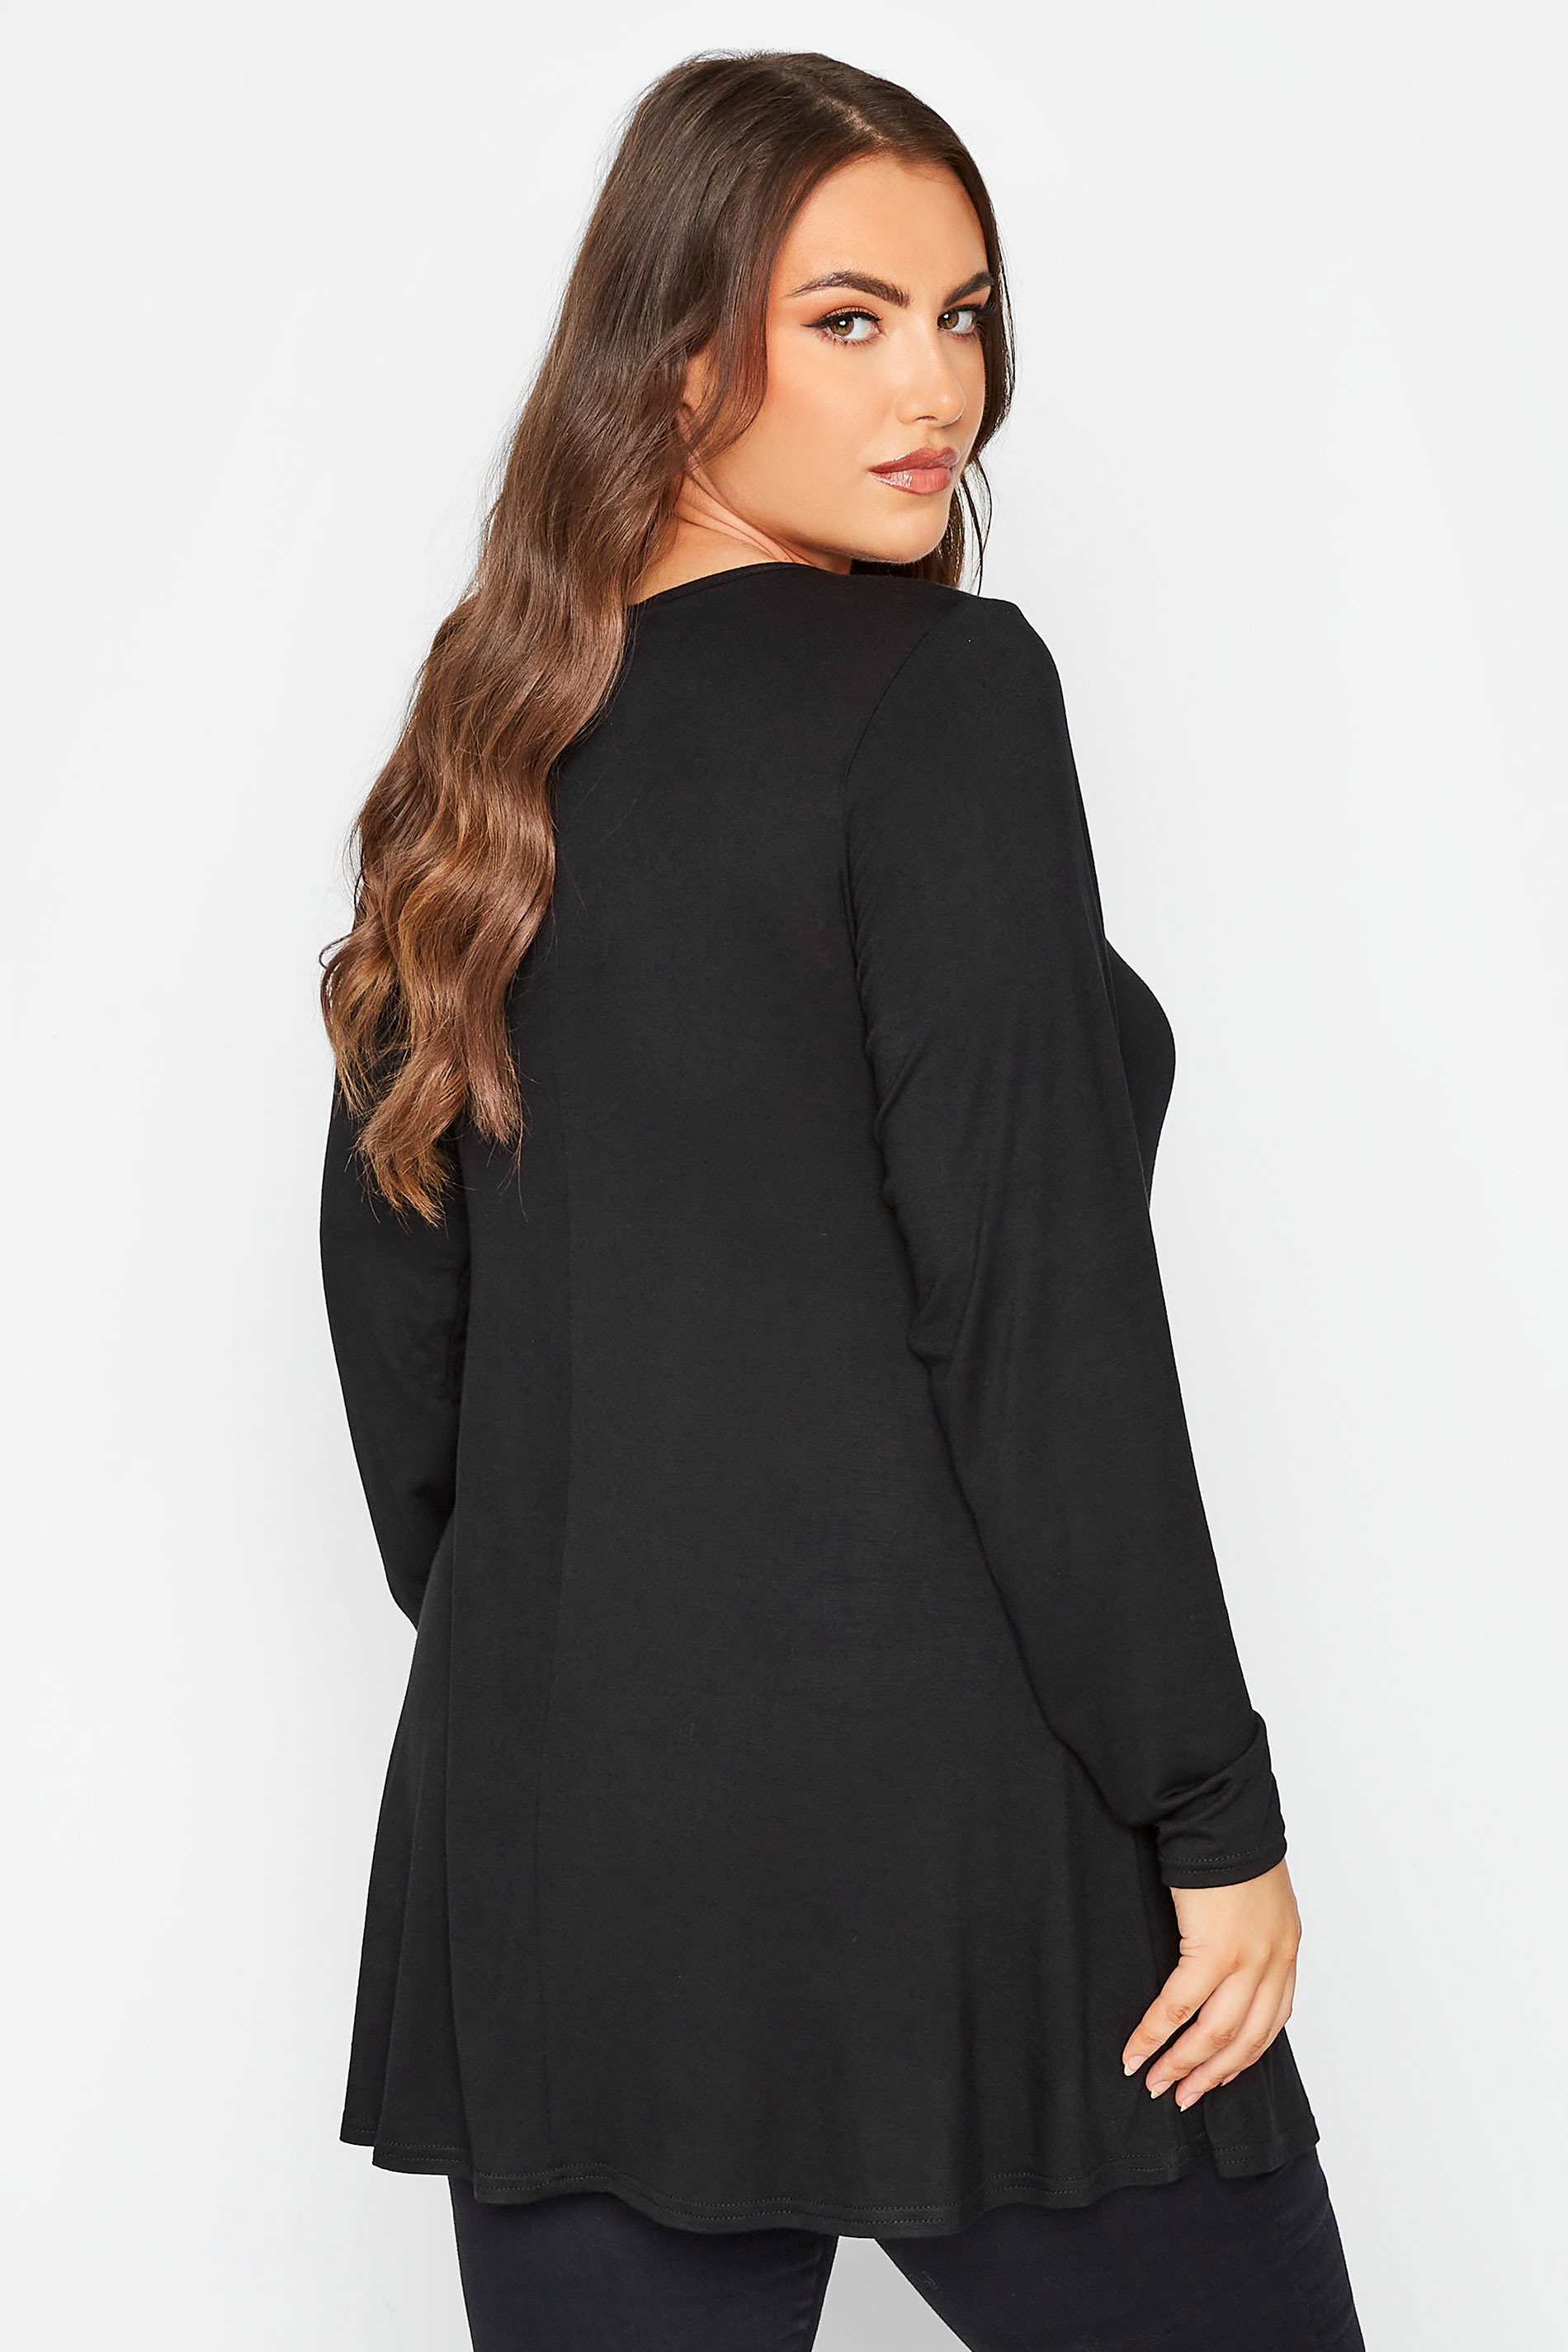 LIMITED COLLECTION Plus Size Black Heart Trim Cut Out Top | Yours Clothing 3